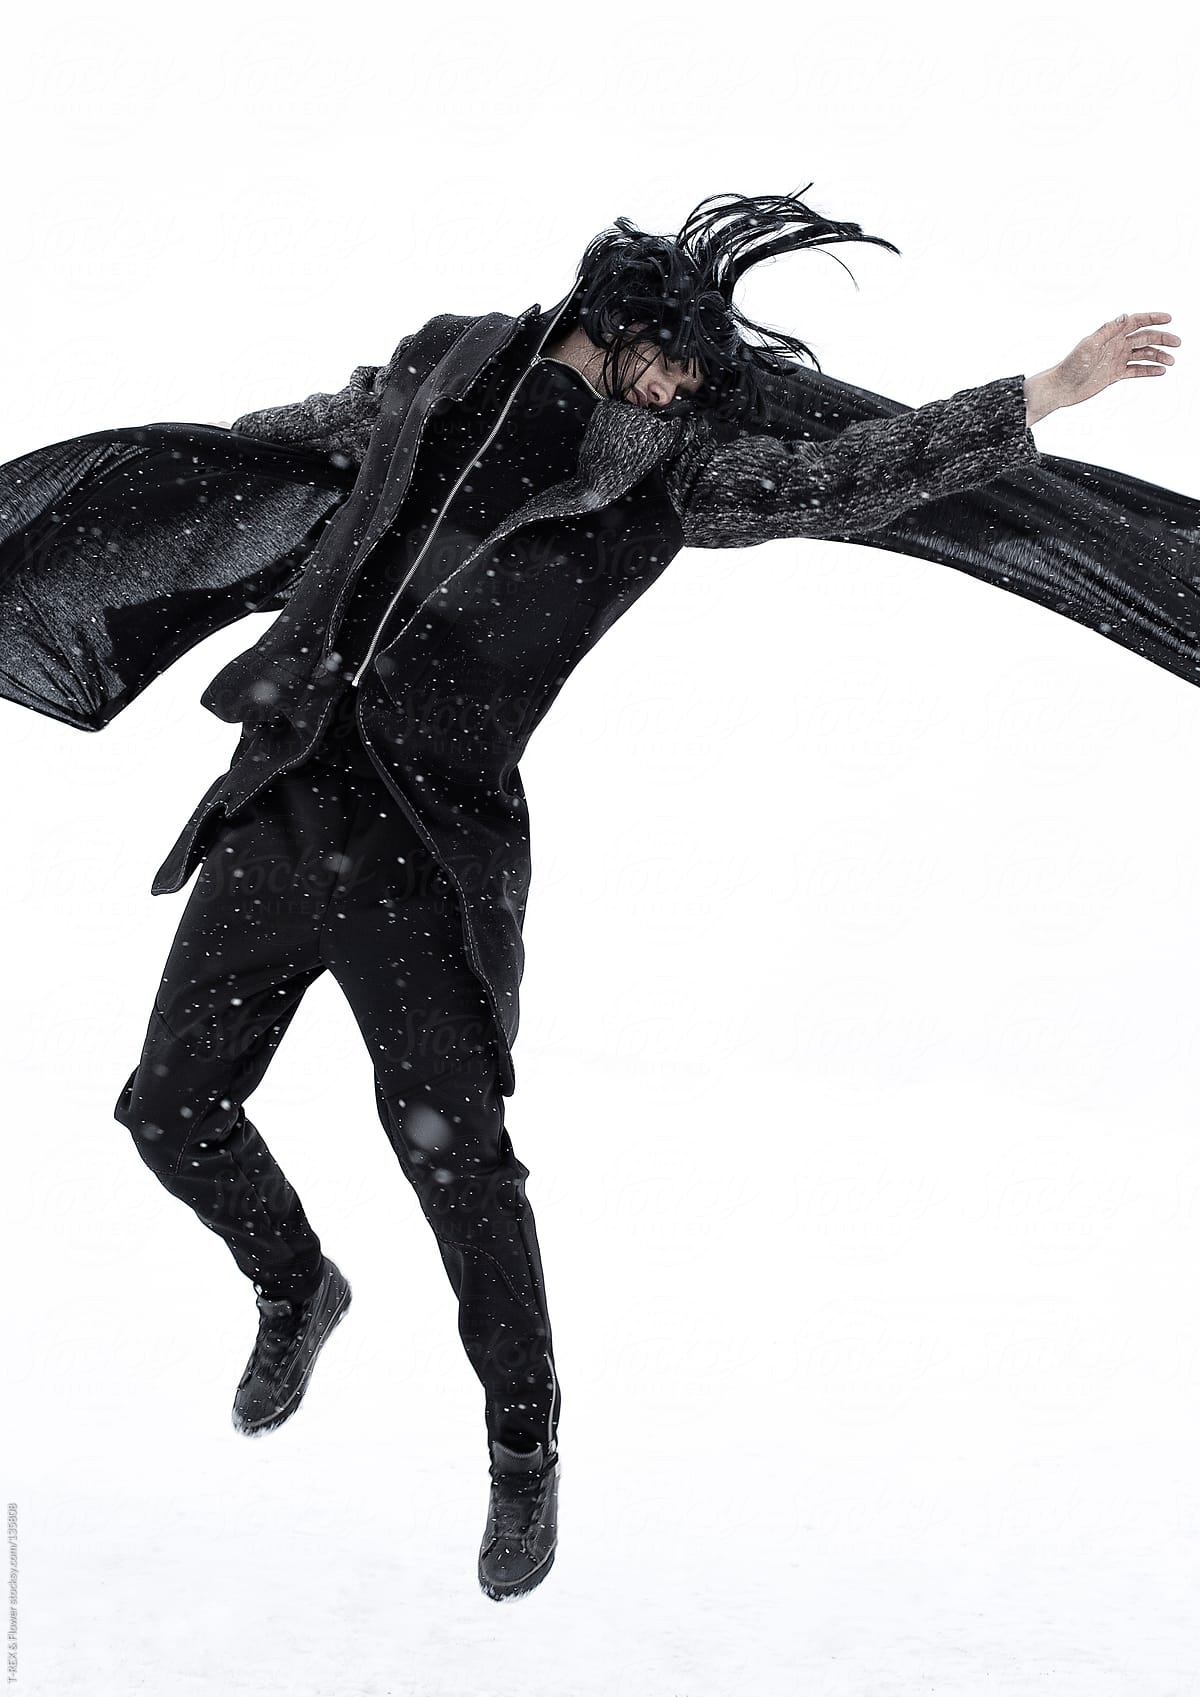 Jumping person with black cape